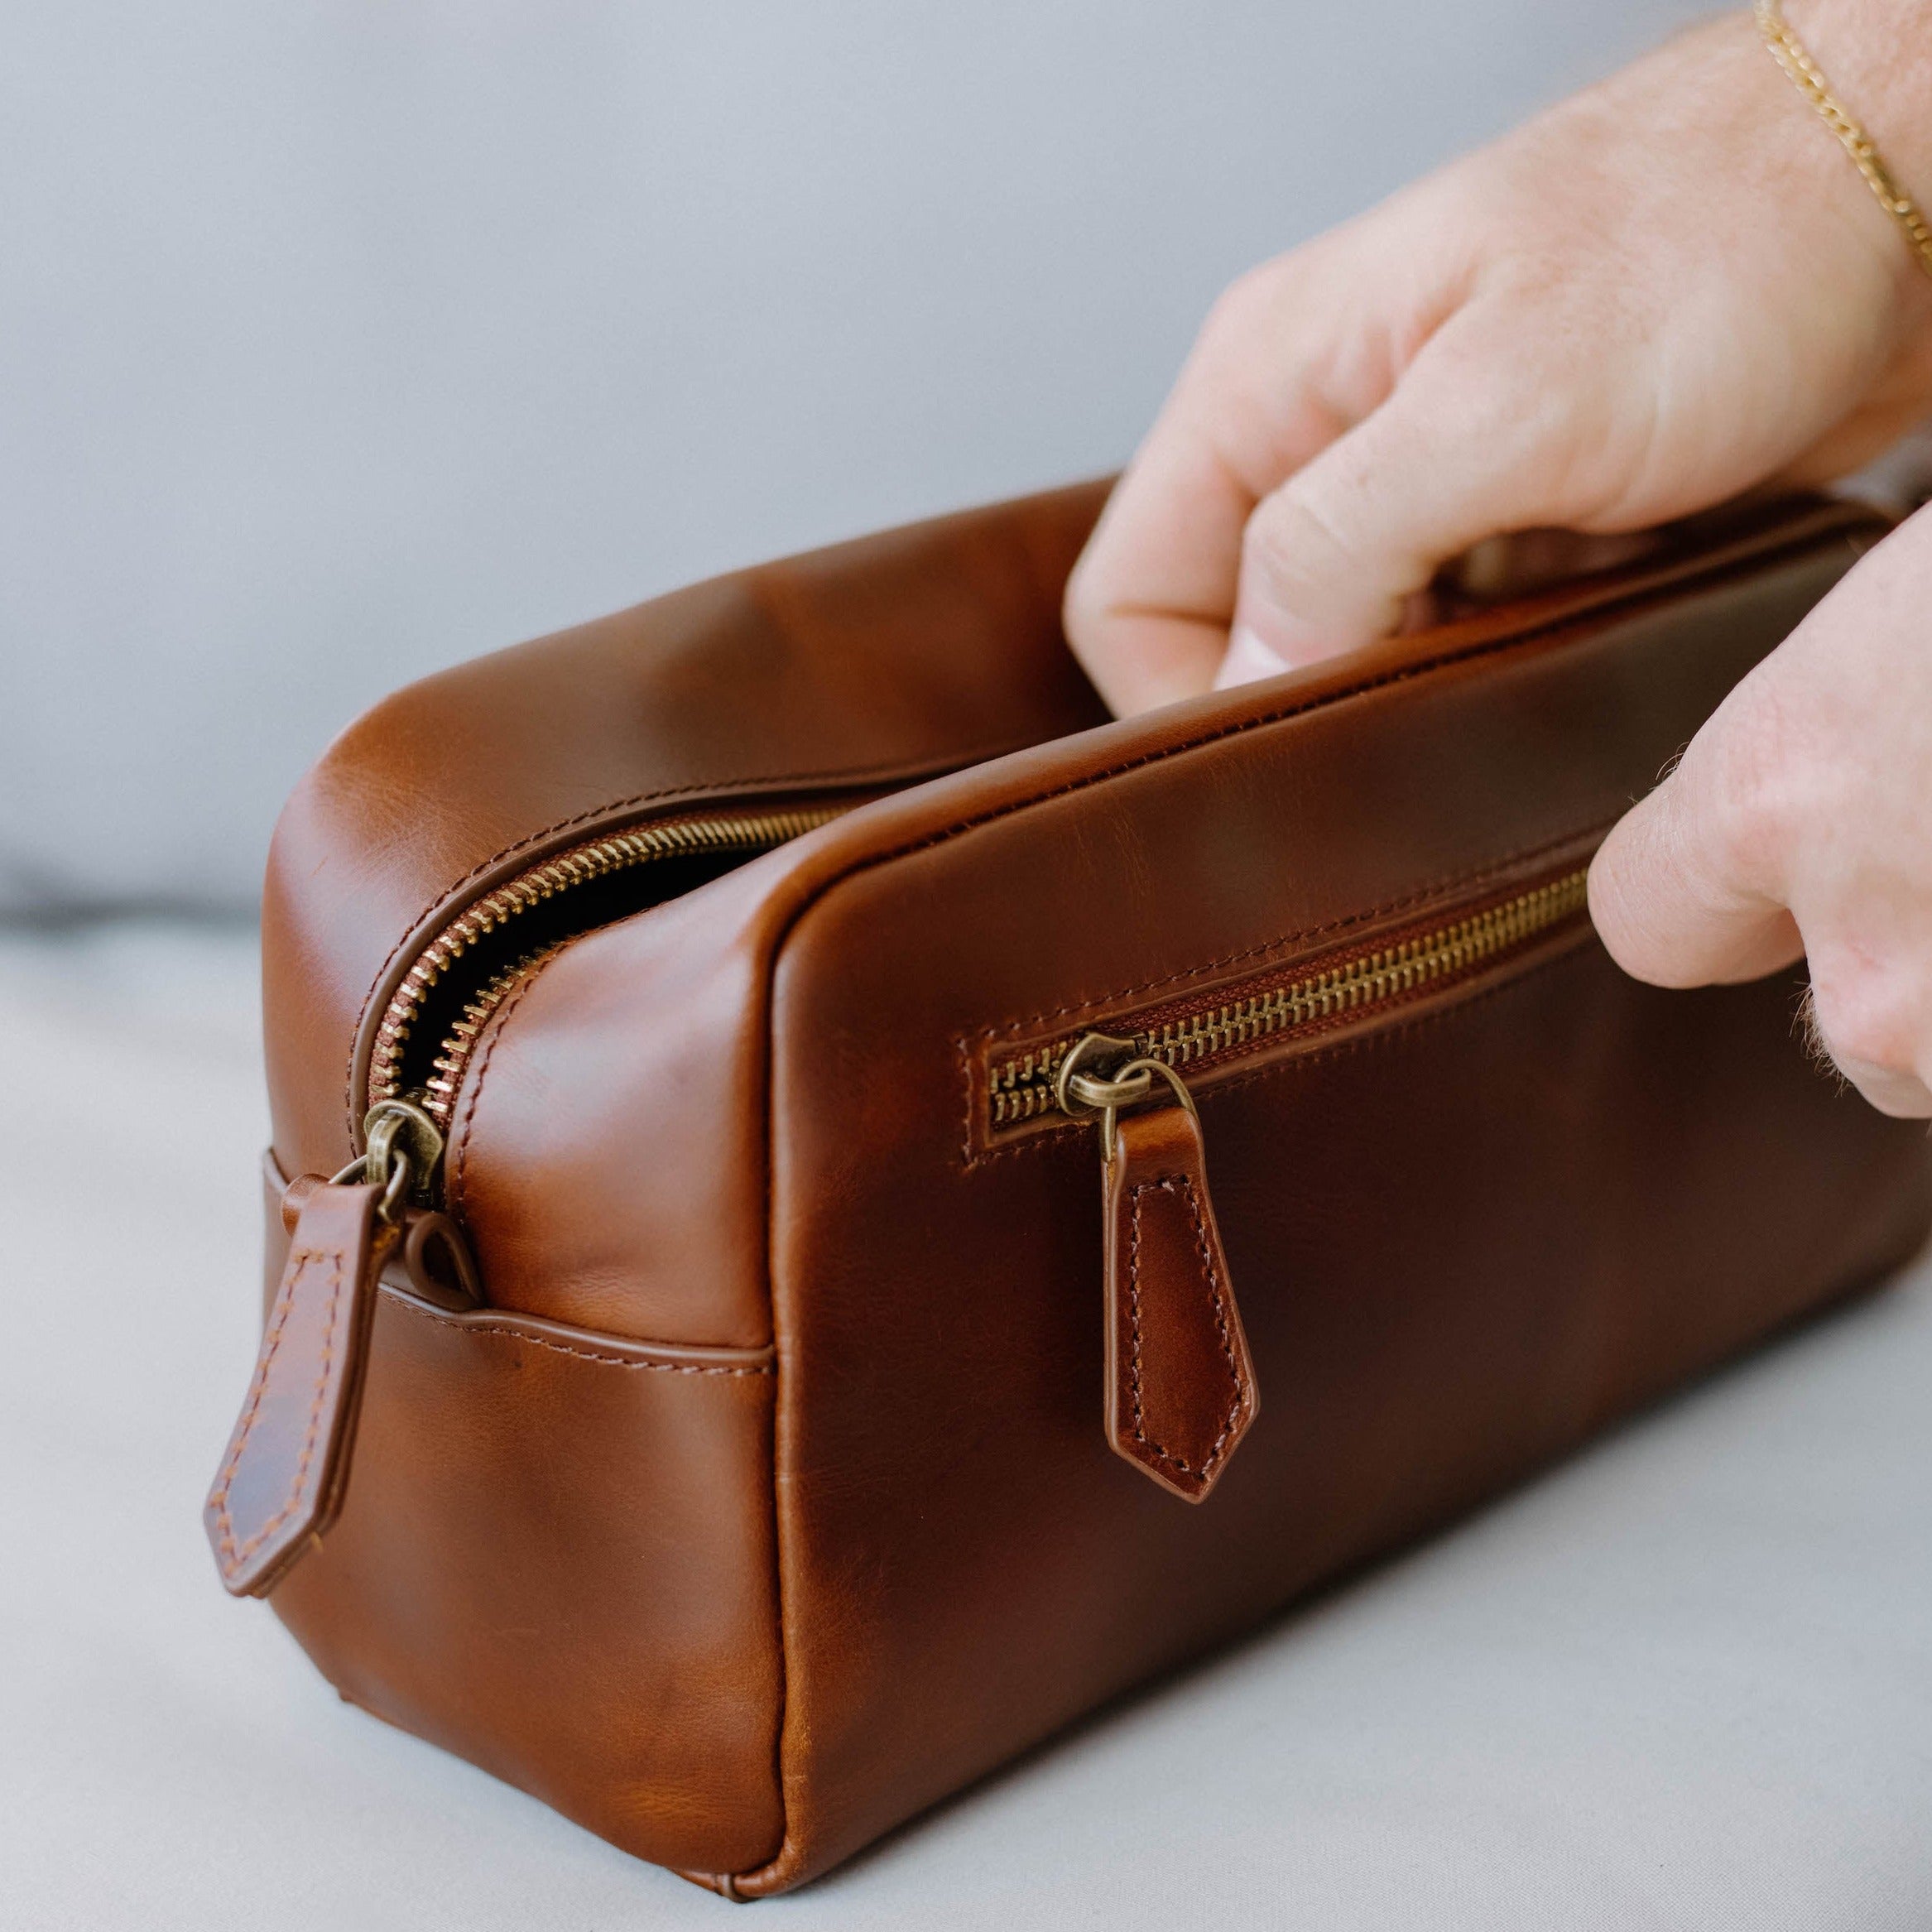 Mens Toiletry Bag: Green Dopp Kit | leather toiletry bag by KMM & Co.